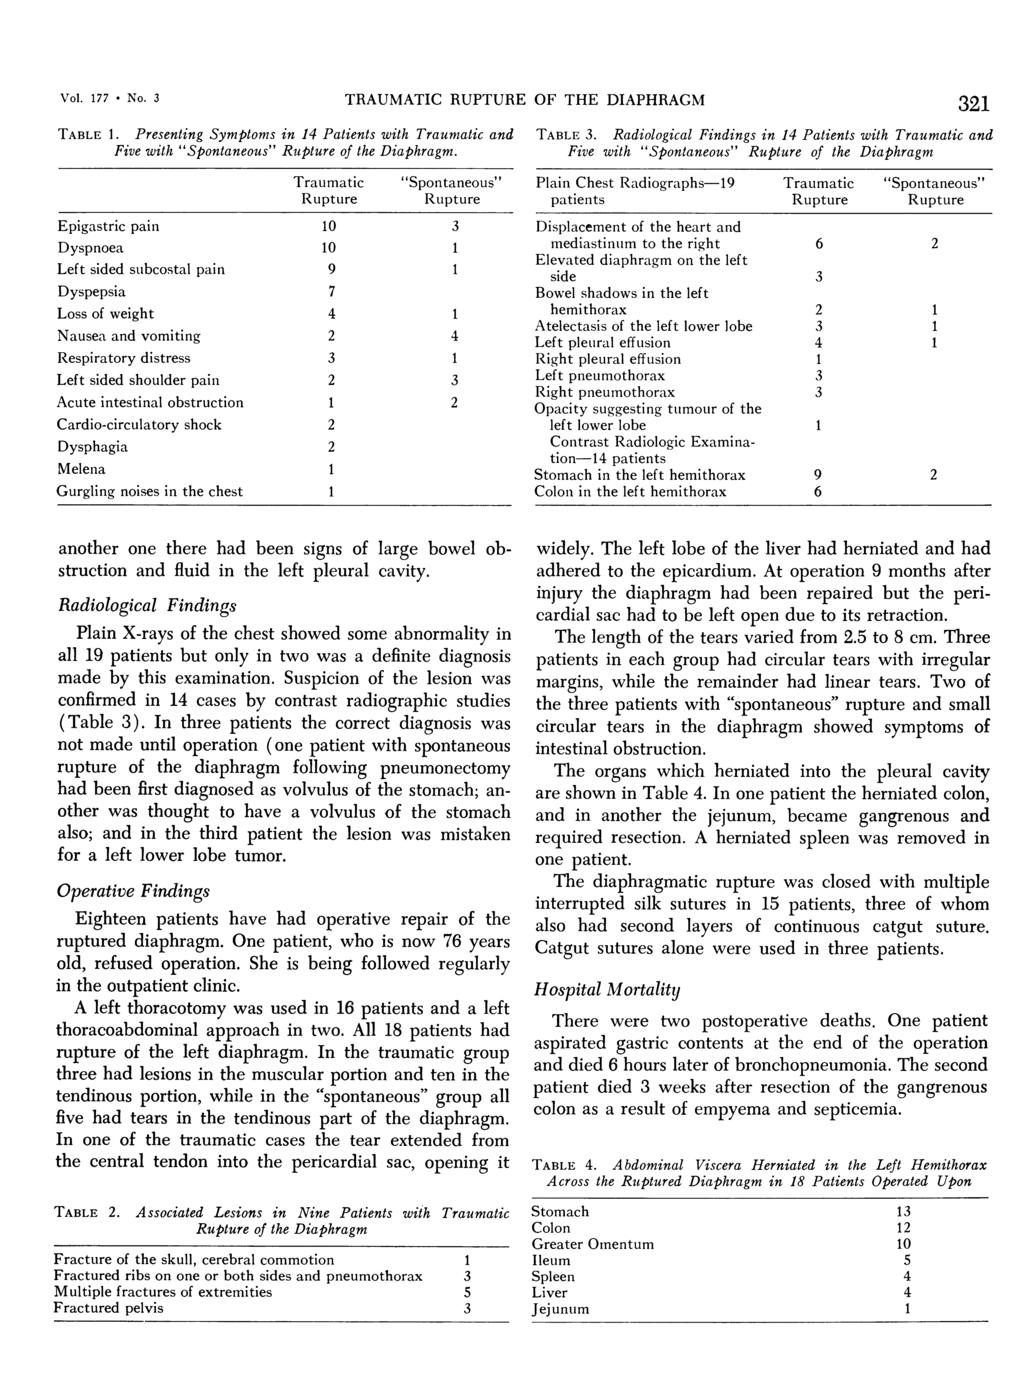 Vol. 17 7 * No. 3 TABLE 1. Presenting Symptoms in 14 Patients with Traumatic and Five with "Spontaneous" Rutpture of the Diaphragm.